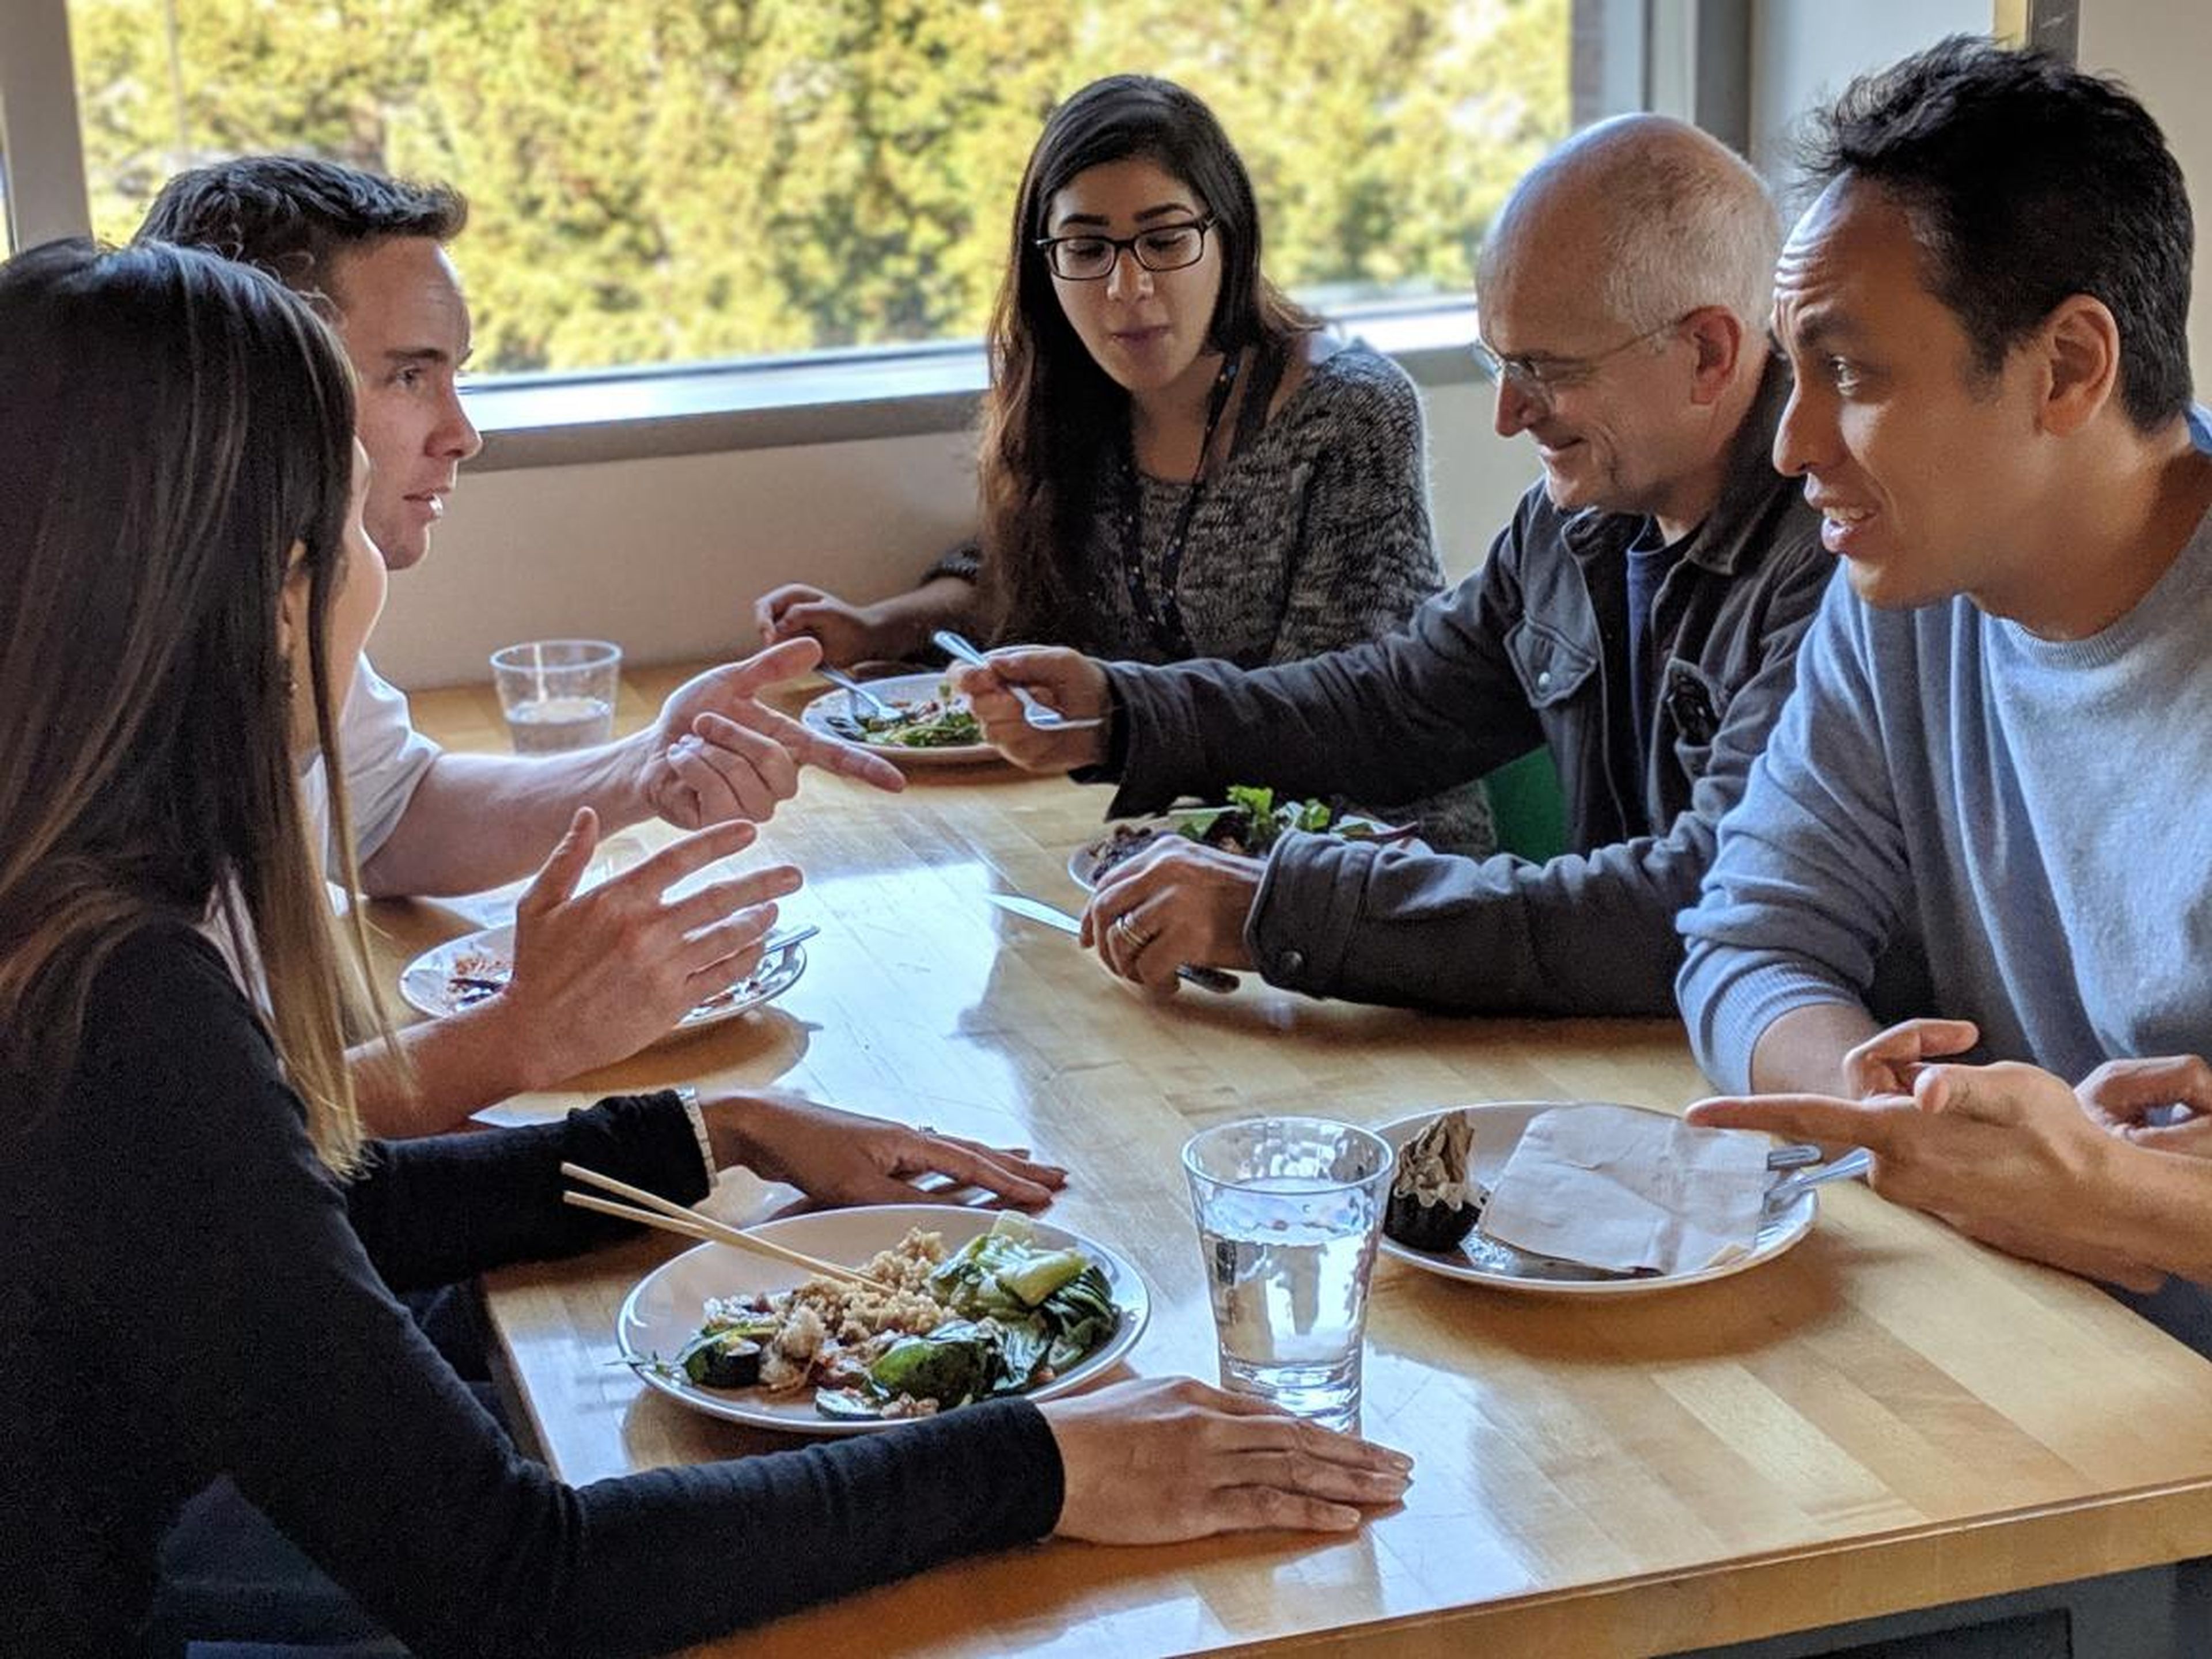 Rincon doesn't always have time for lunch, but she prefers to have lunch meetings when she can. "It gives me a chance to connect with colleagues and catch up on what they're working on with other teams," she said.